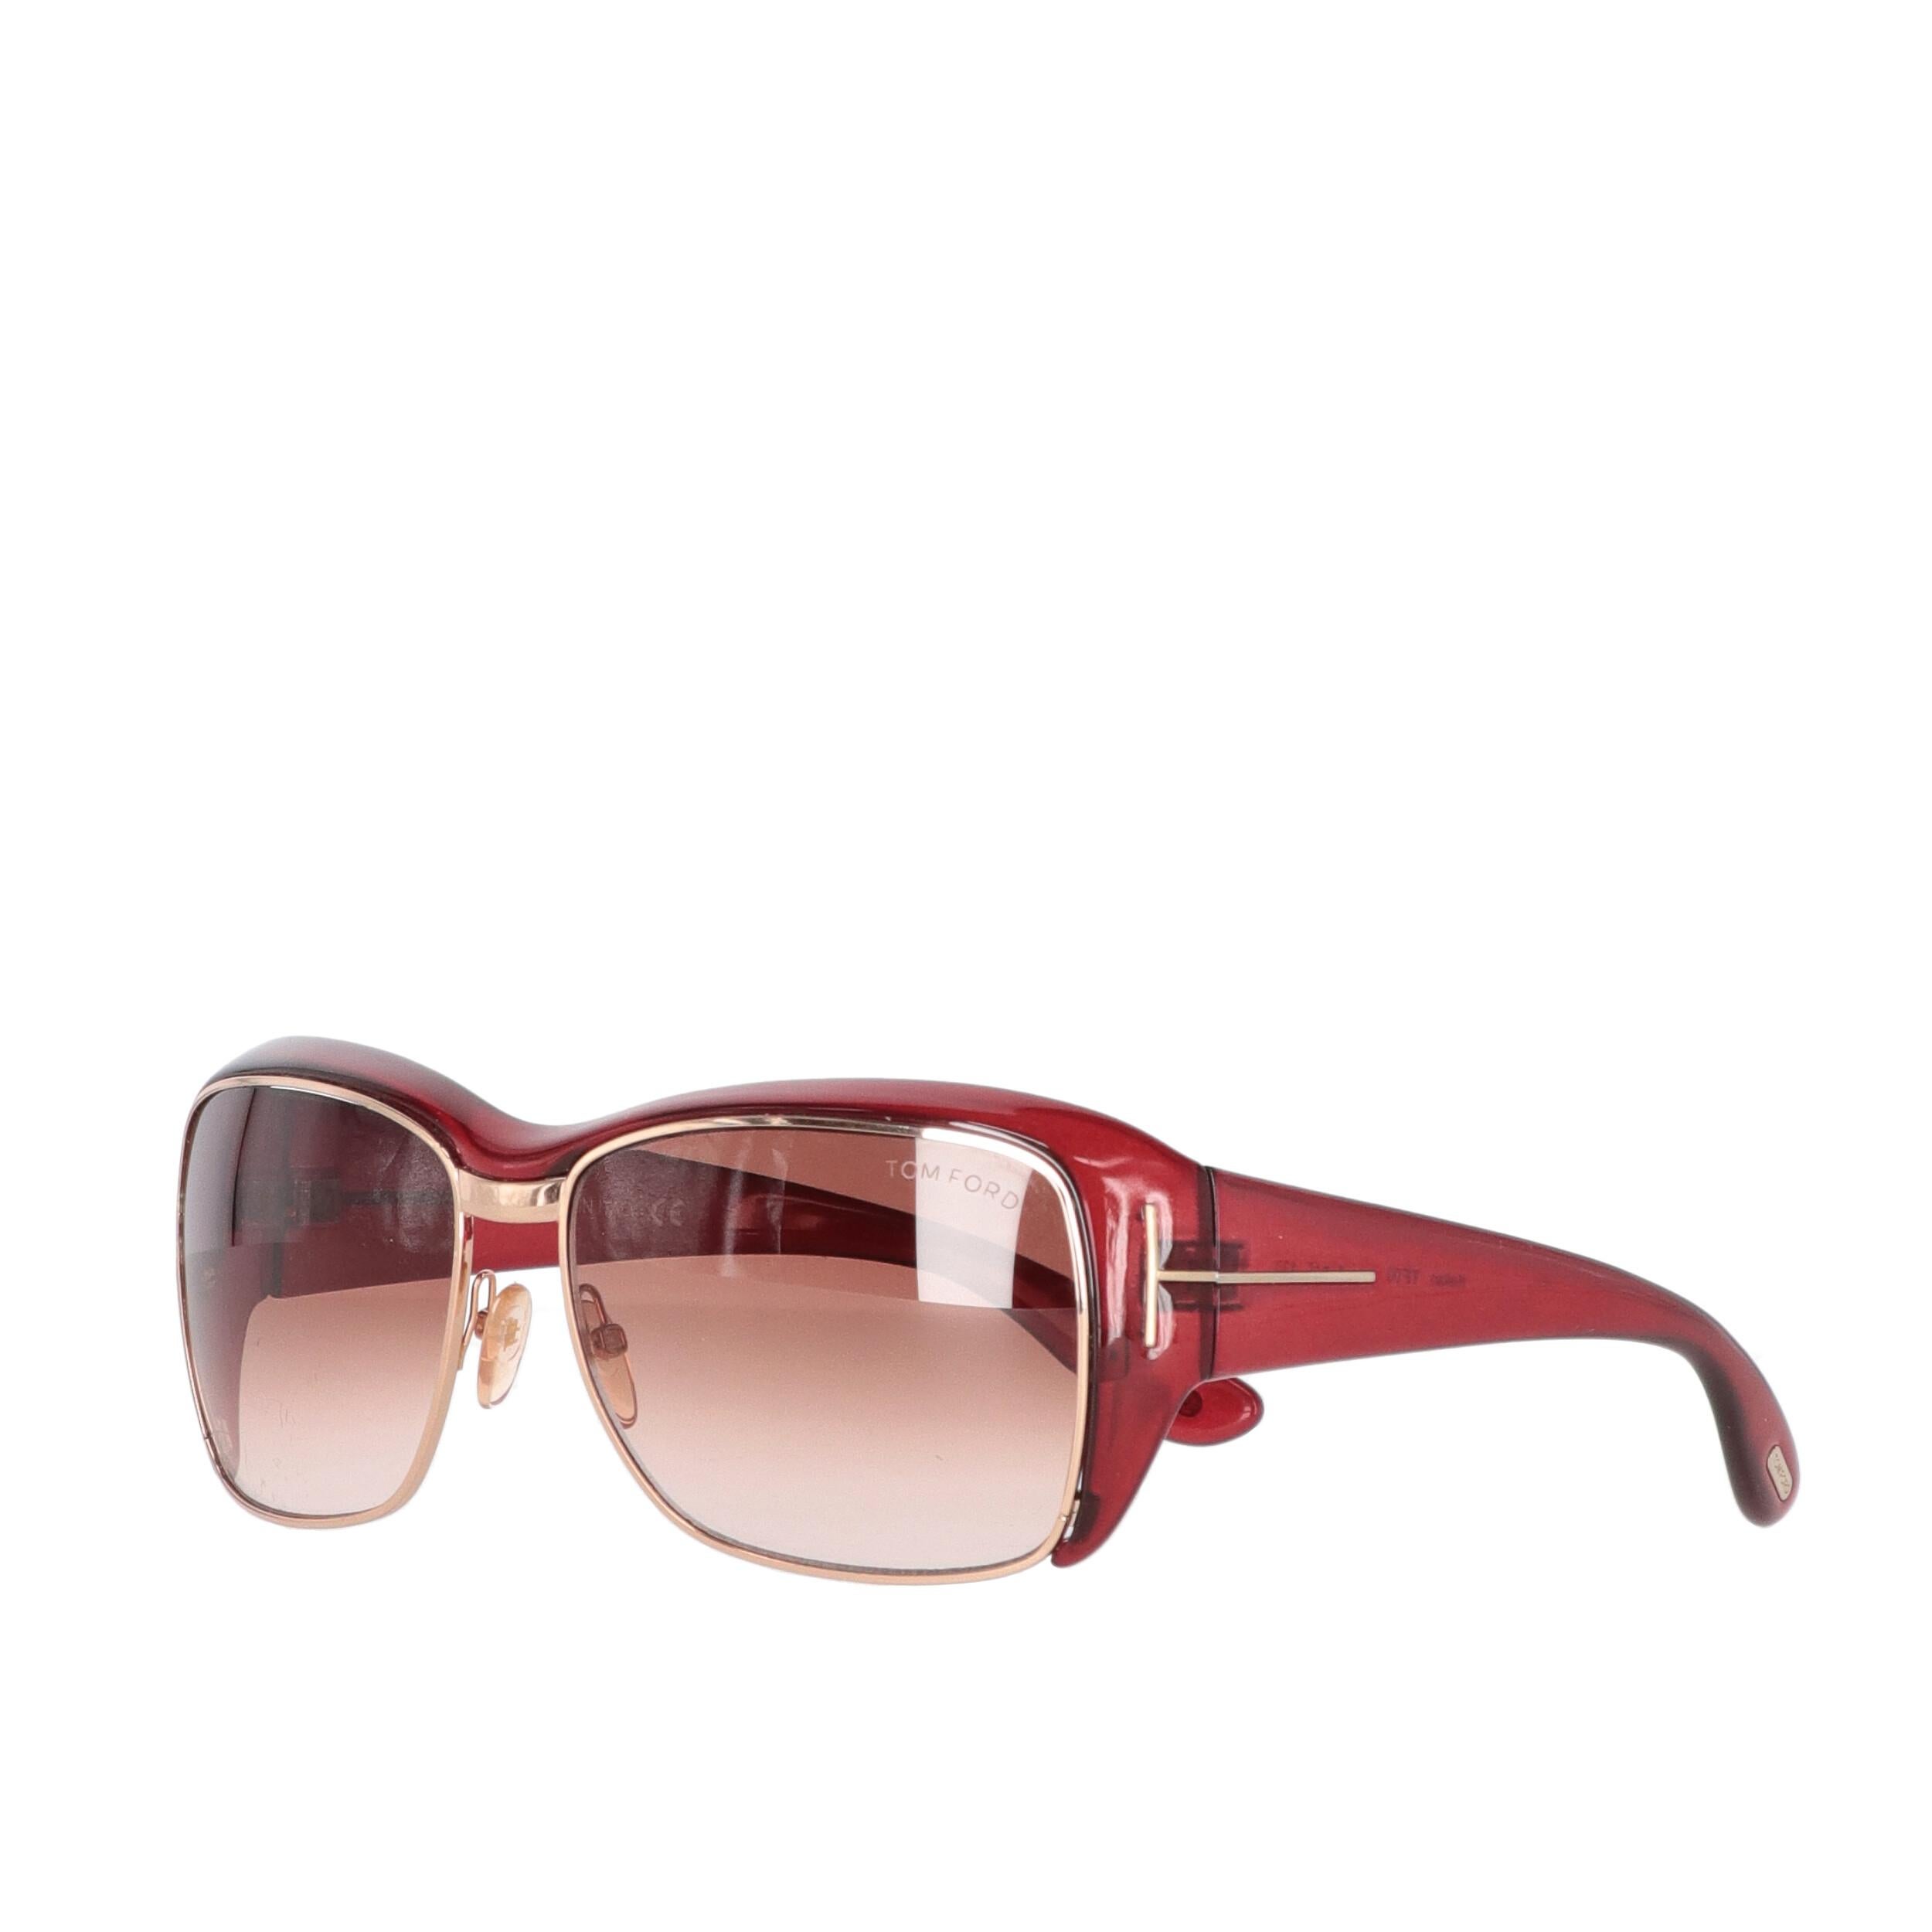 Tom Ford transparent red frame sunglasses with gold-tone metal details. Shaded light-brown lenses.

Please note, this item cannot be shipped to the US.

Years: 2010s
Made in Italy

Width: 14,5 cm
Height: 5 cm